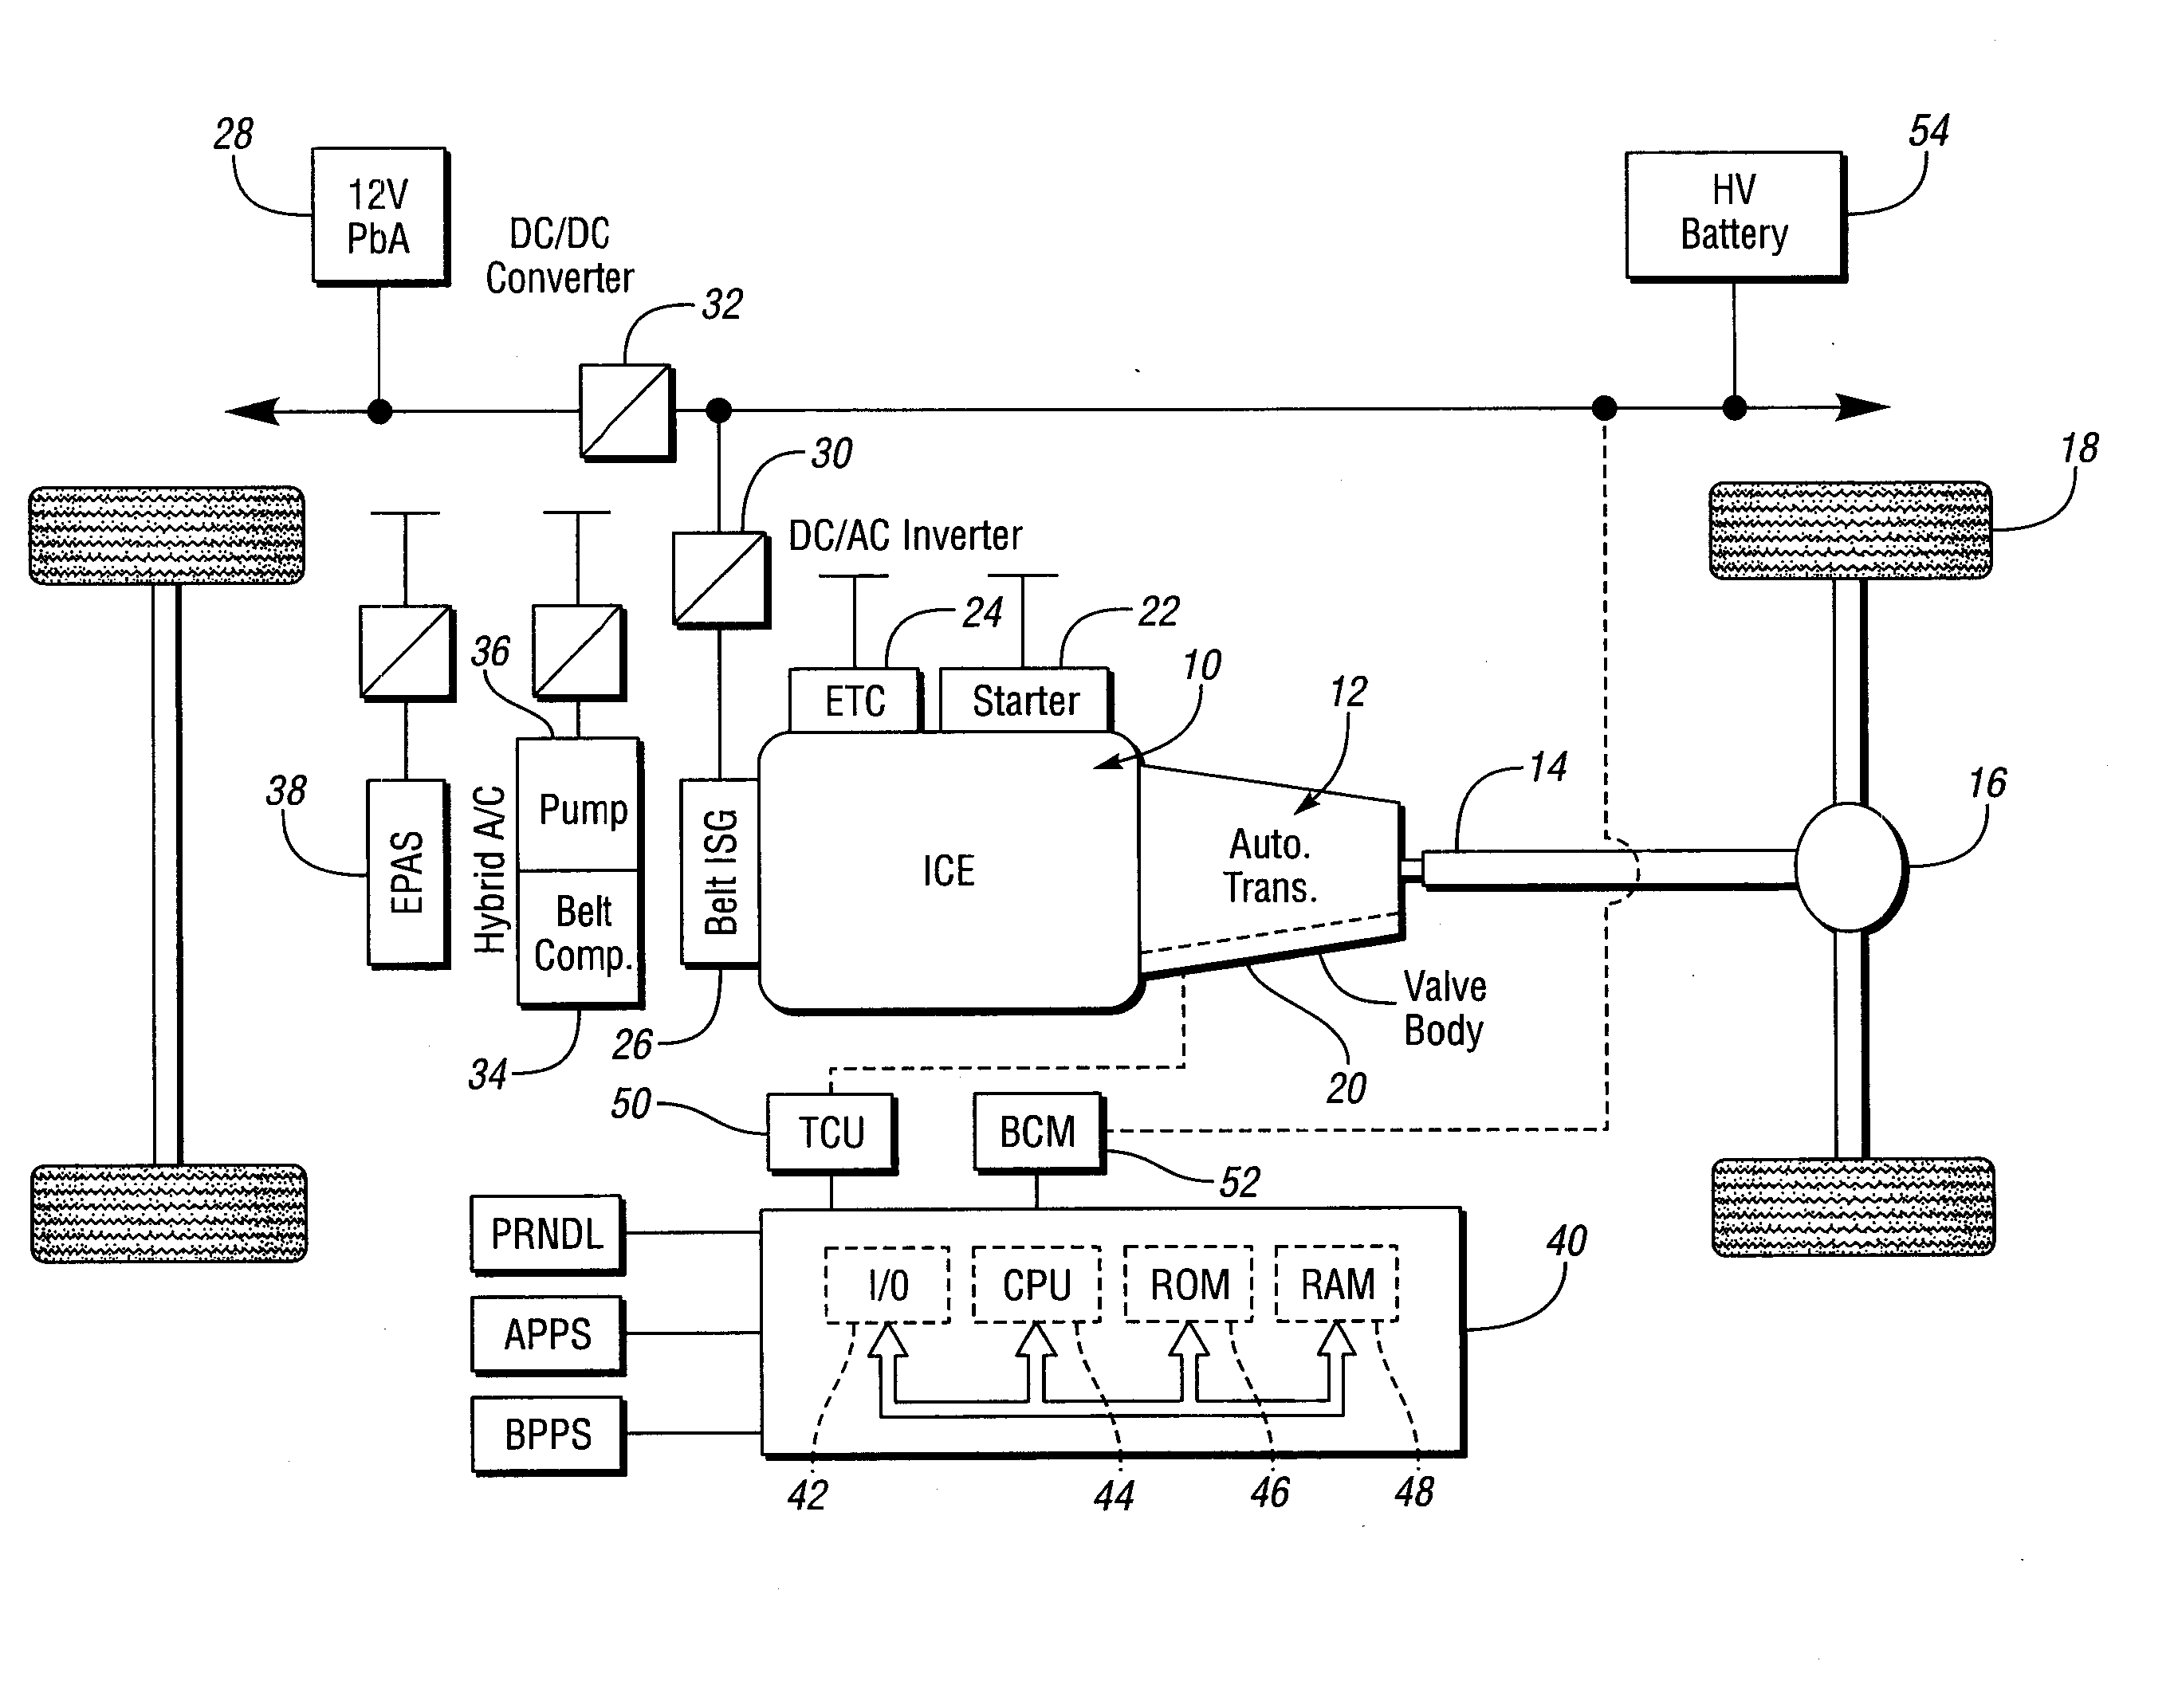 Method for Controlling a Micro-Hybrid Electric Vehicle with an Automatic Transmission